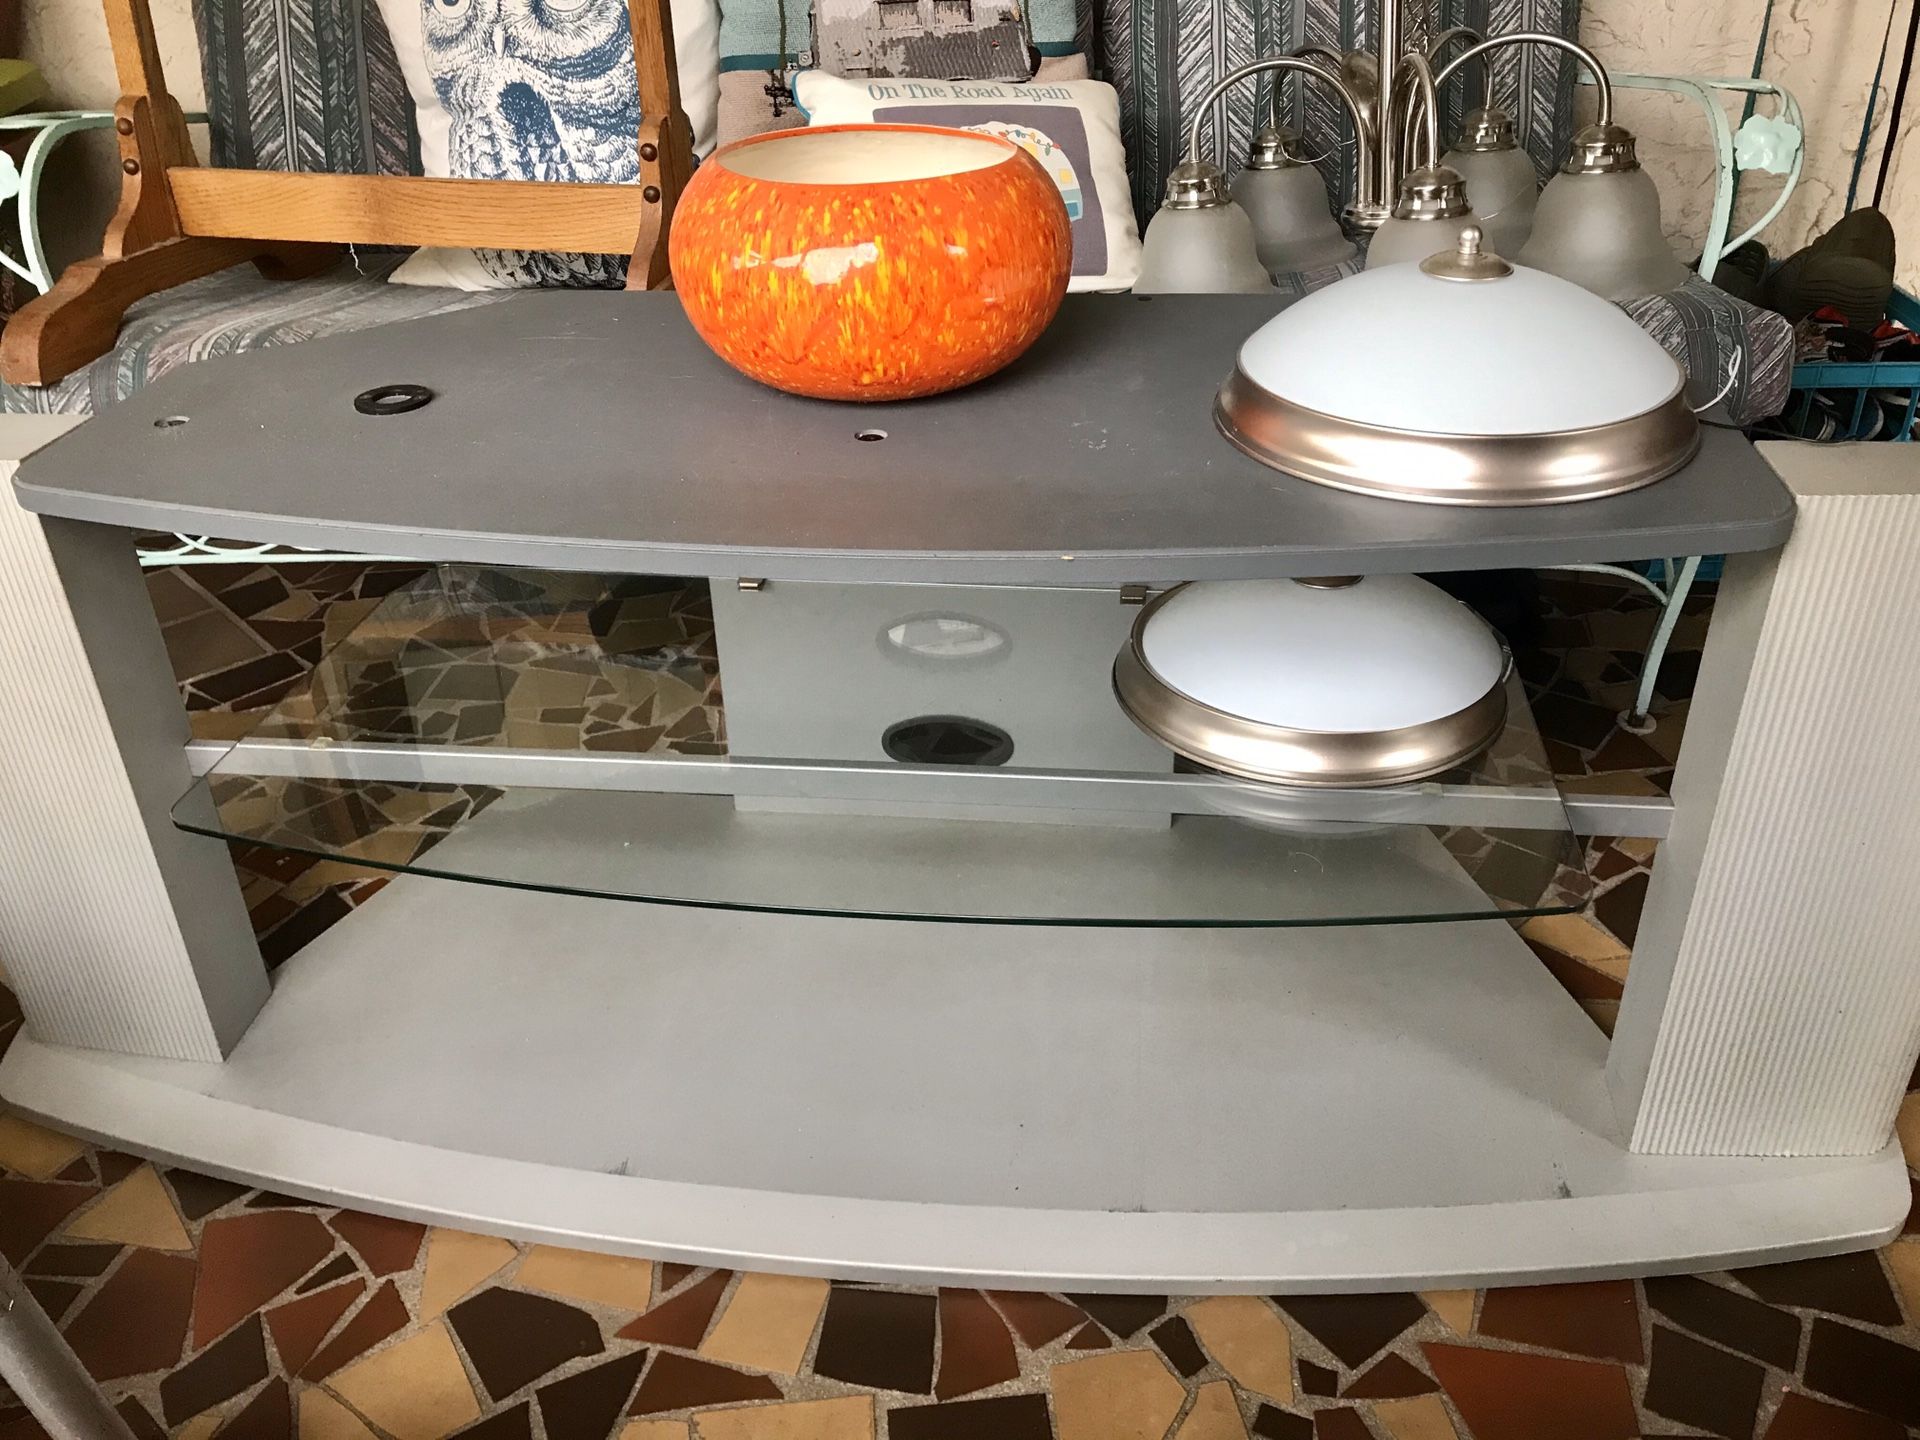 Entertainment stand